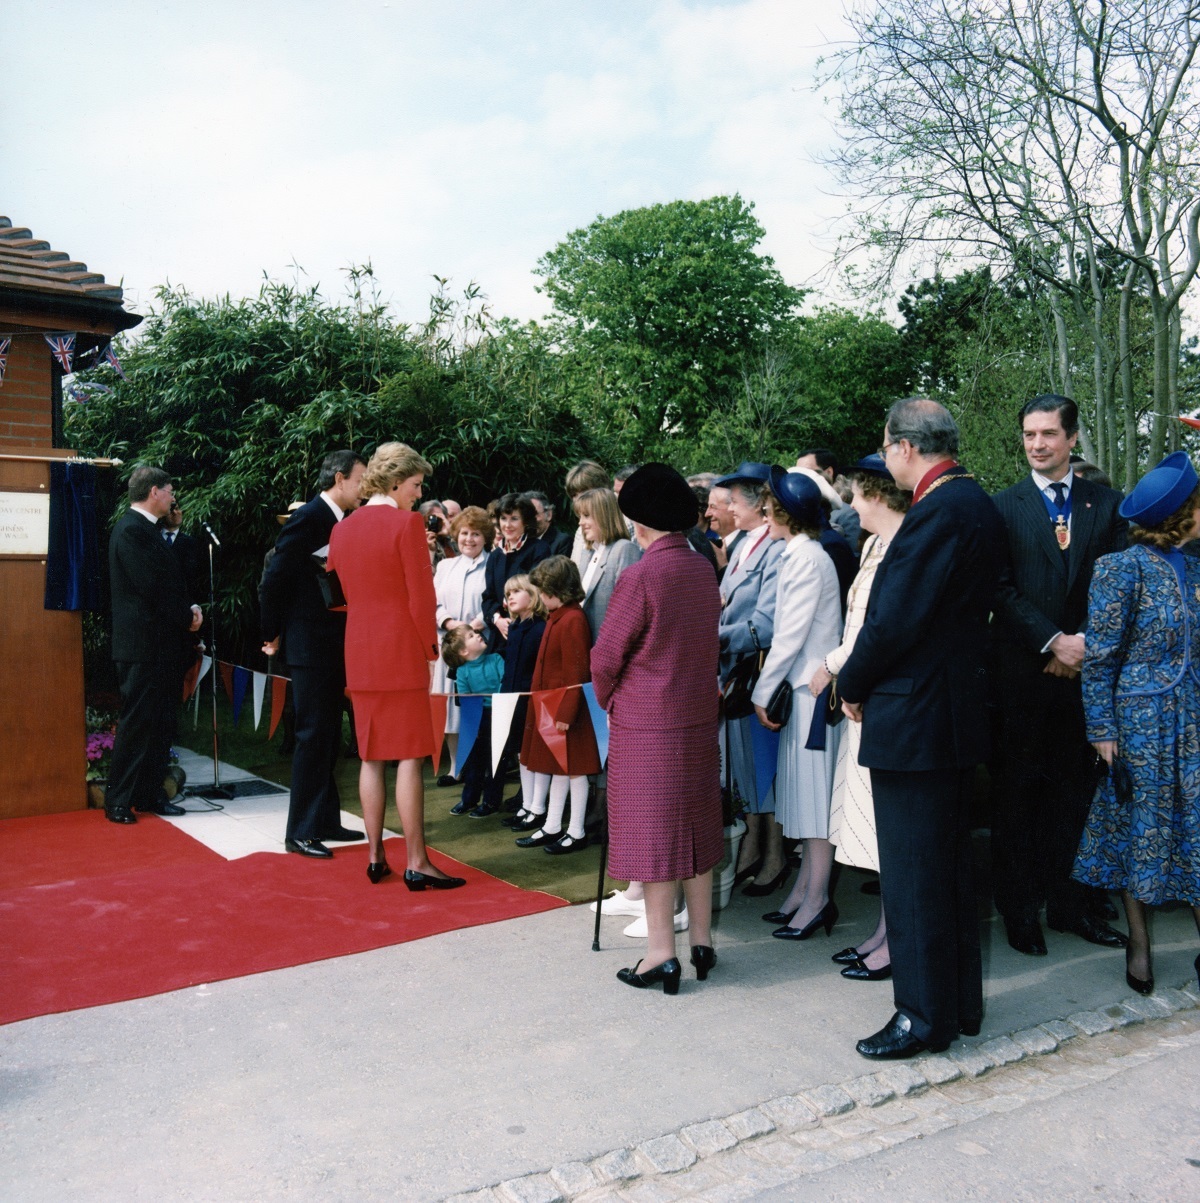 Greeting the VIPs - this introduction included the children and grandchildren of Joan and Robin Tomkins